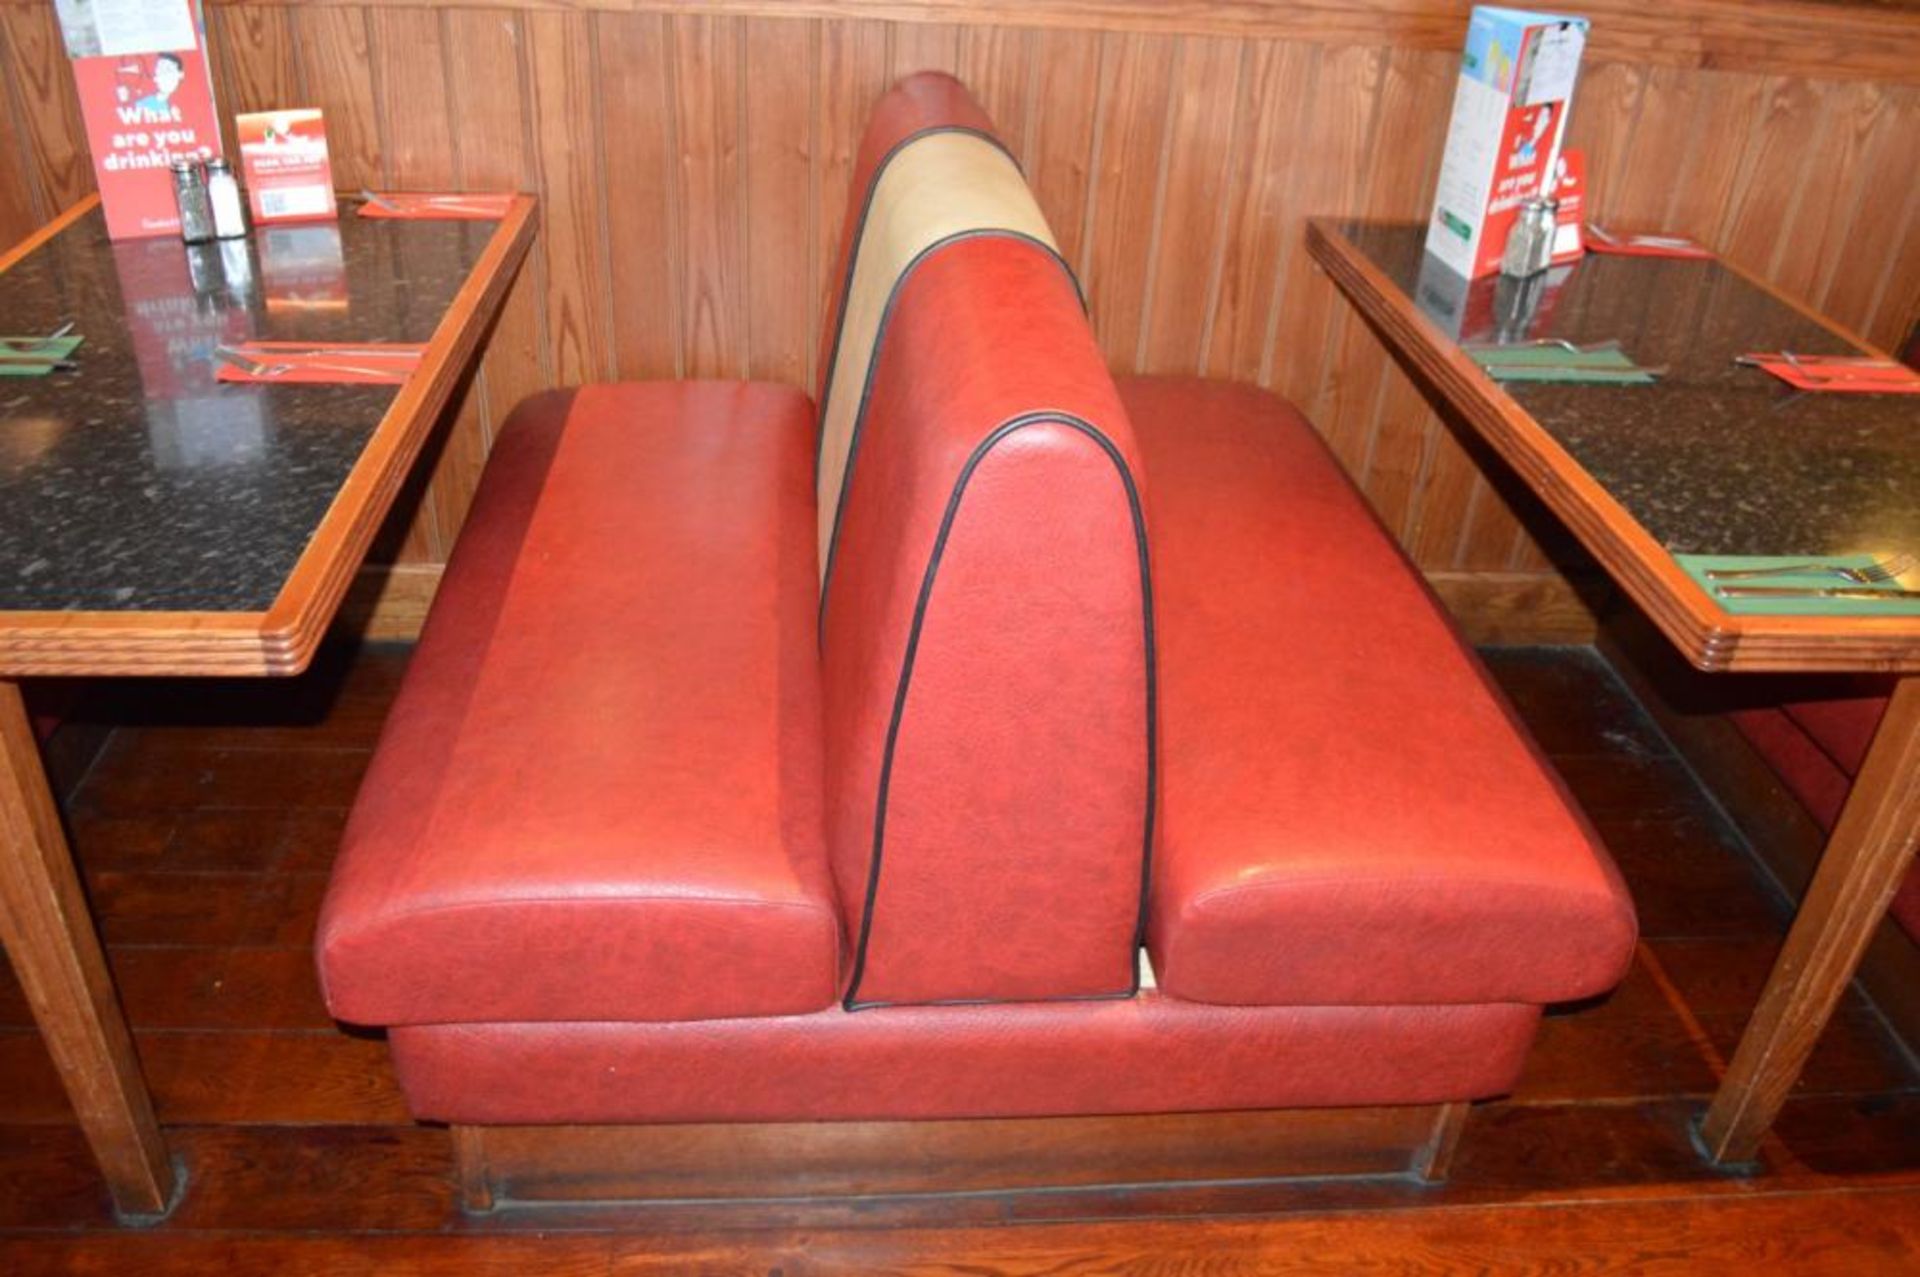 1 x Selection of Cosy Bespoke Seating Booths in a 1950's Retro American Diner Design With Dining Tab - Image 9 of 30